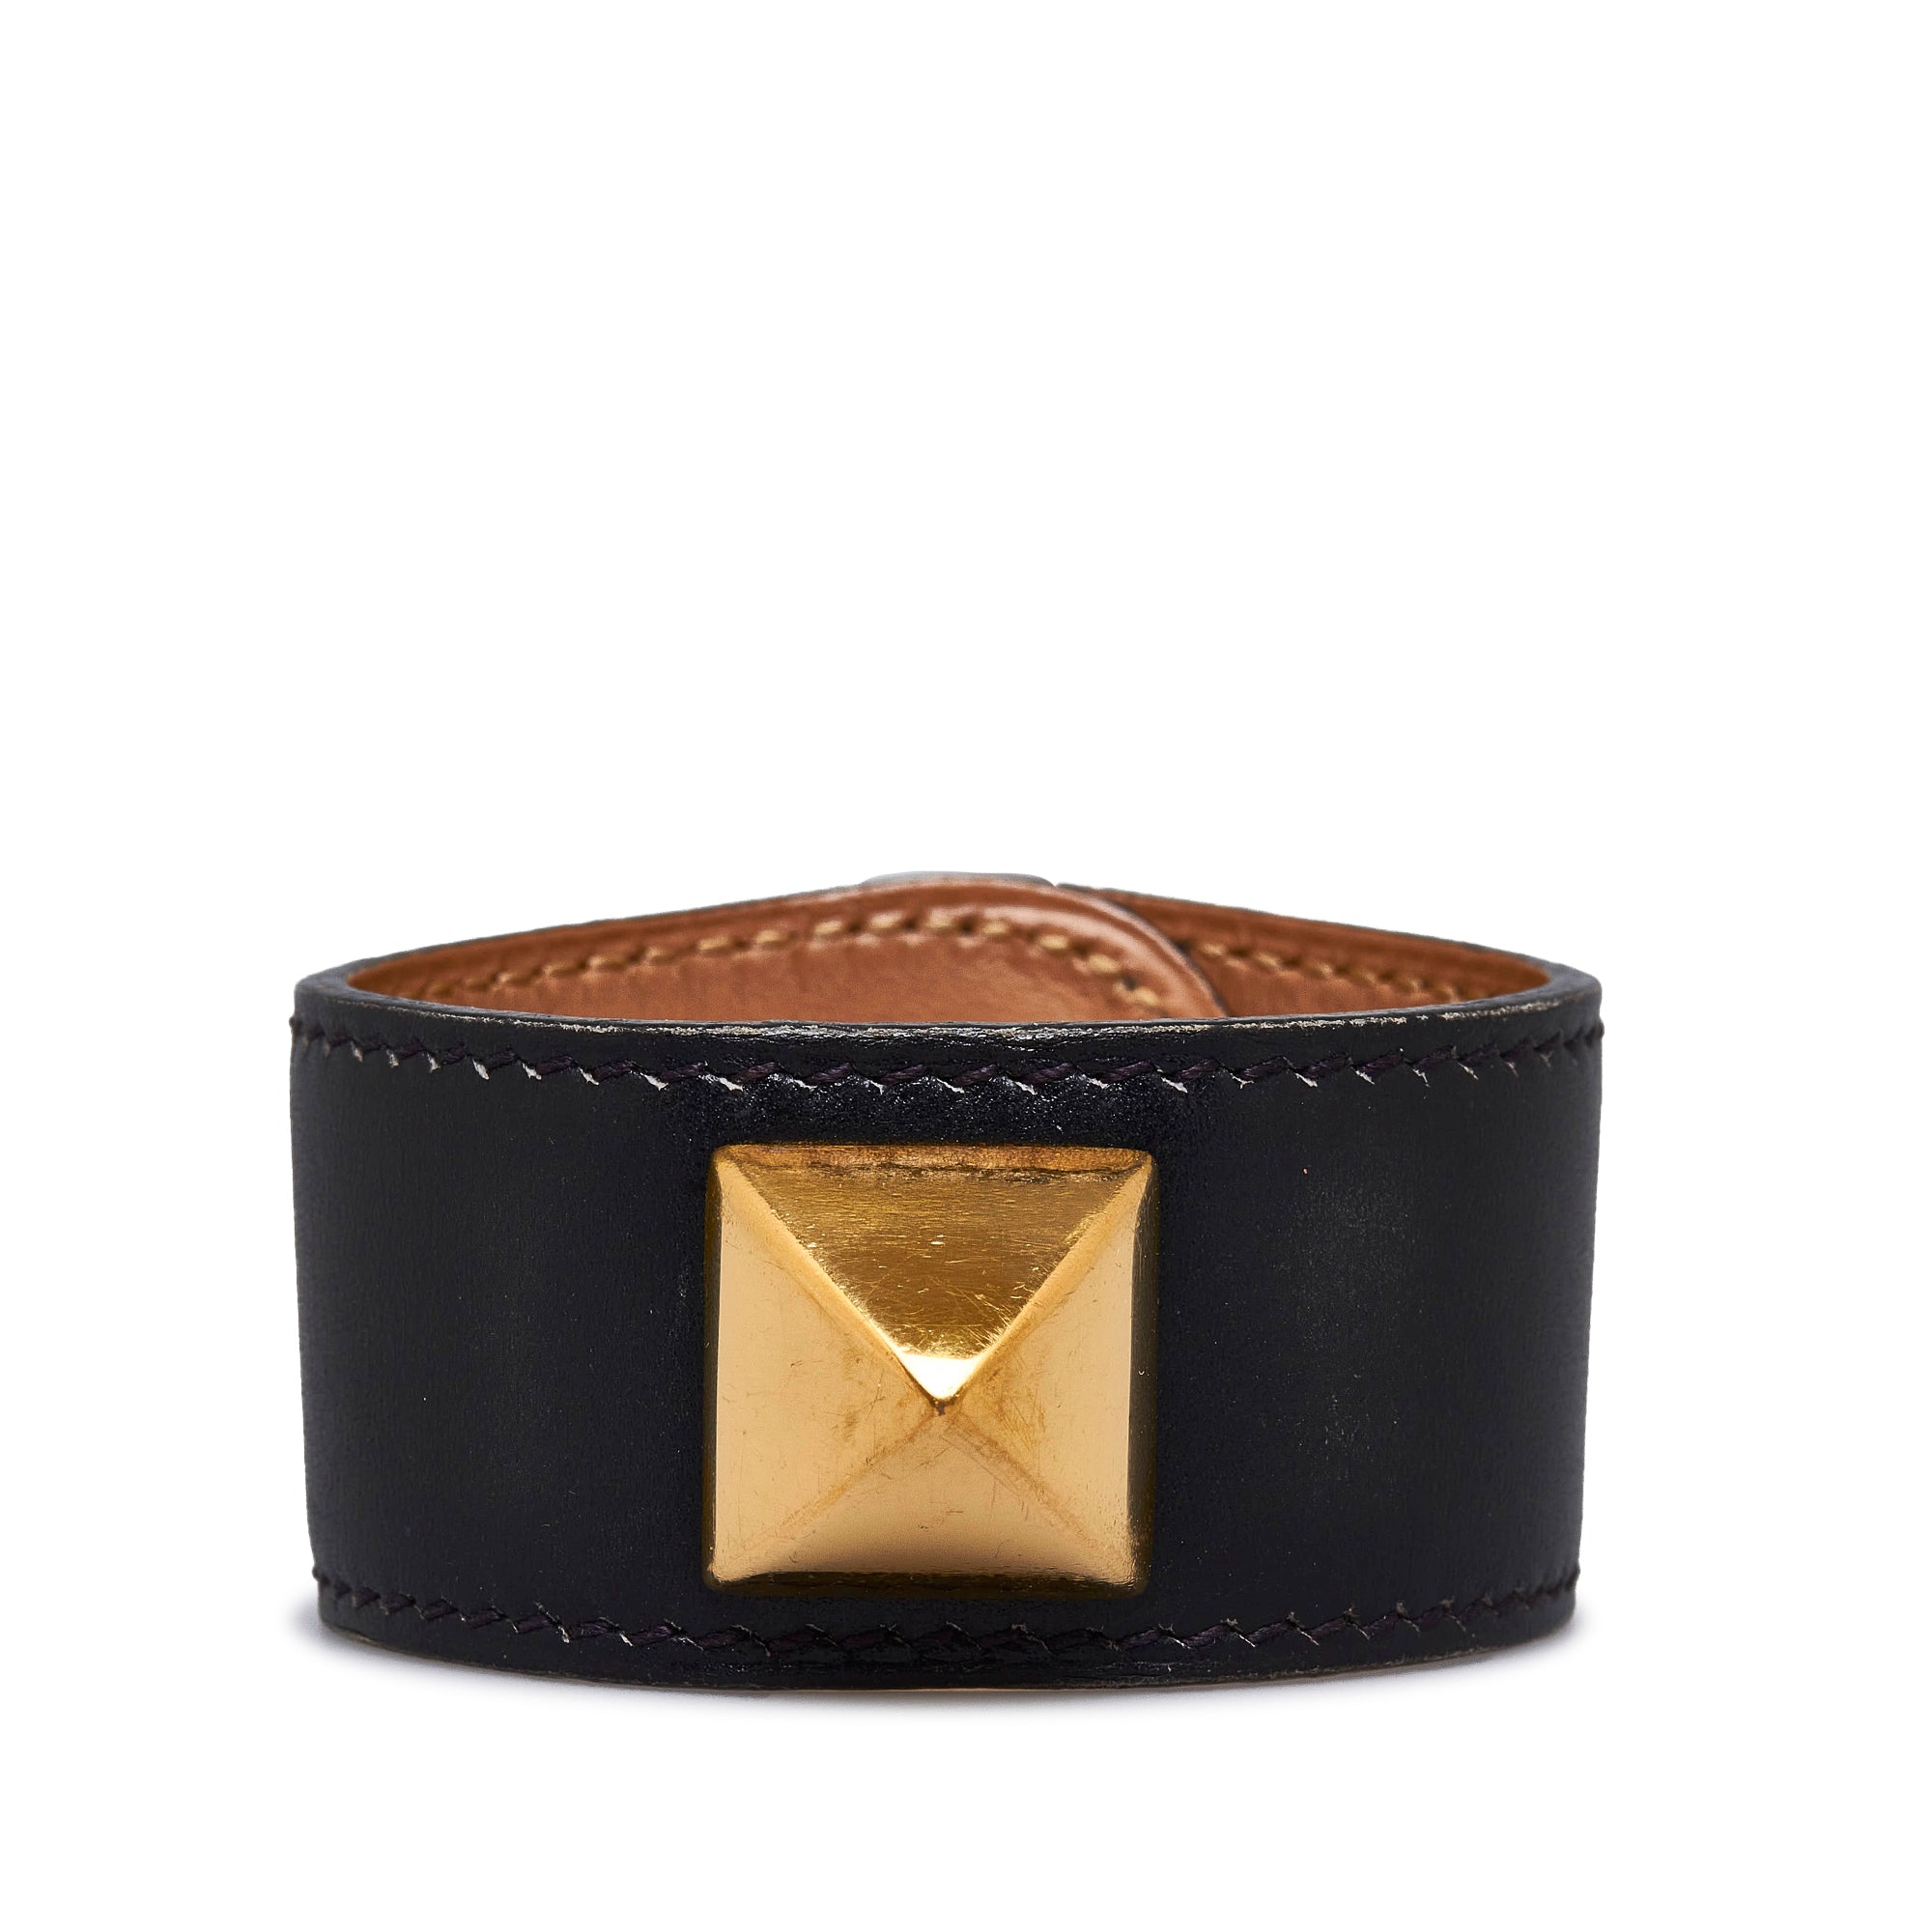 Louis Vuitton - Authenticated Bracelet - Leather Black for Women, Very Good Condition